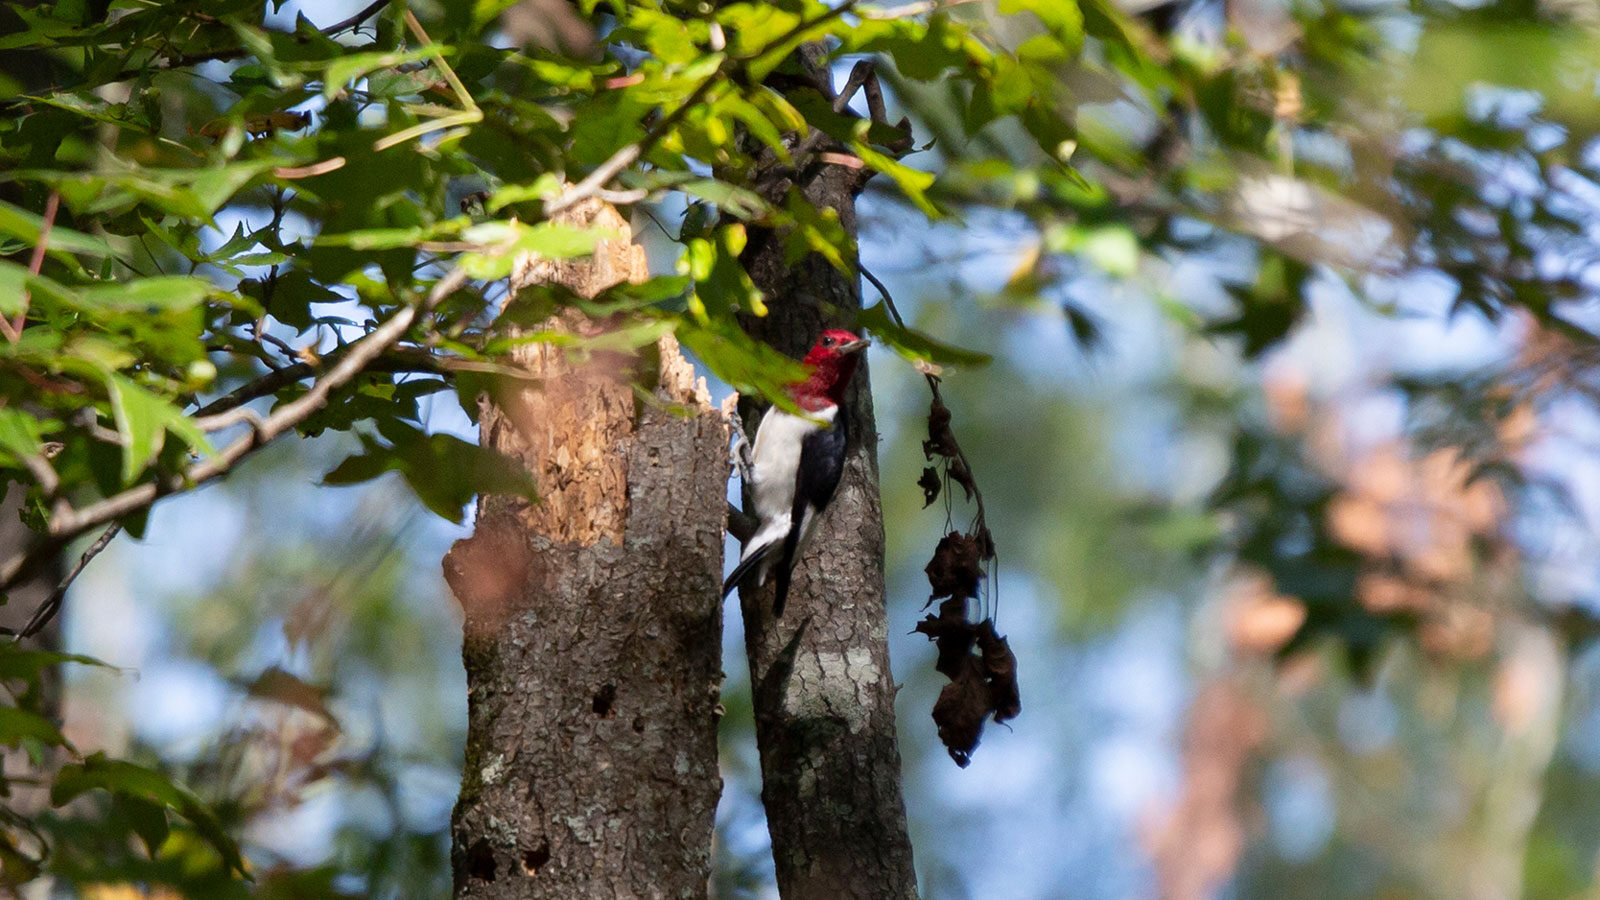 Mature red-headed woodpecker looking out from its perch on a dead tree trunk